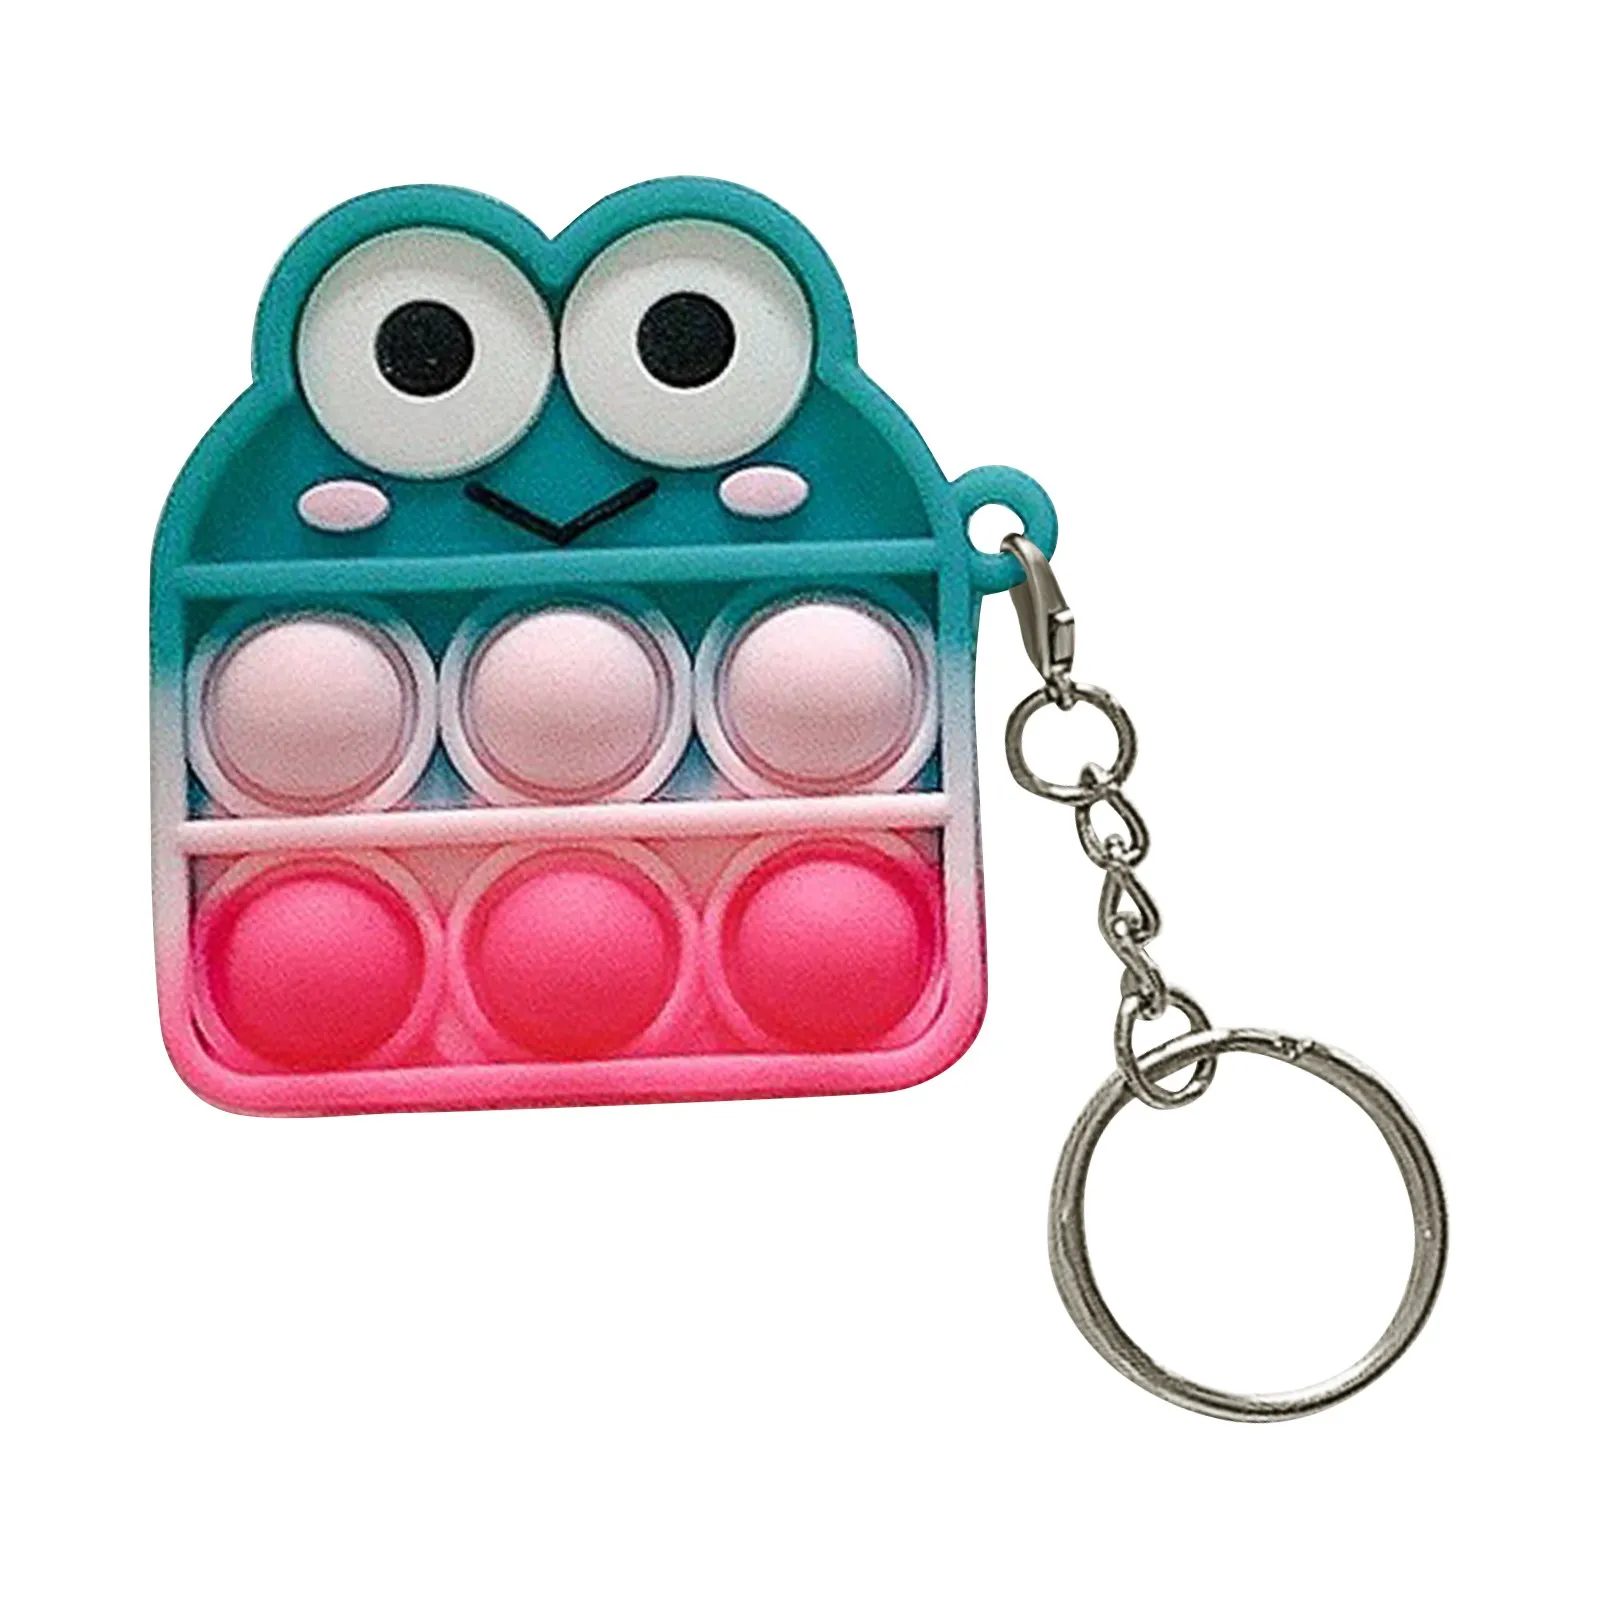 fidget squishy balls Anti Stress Mini Pops Simple Dimple Keychain Its Push Bubble Anxiety Sensory Fidget Toy Relief for Autism Adhd Children Adults fidget snapper Squeeze Toys